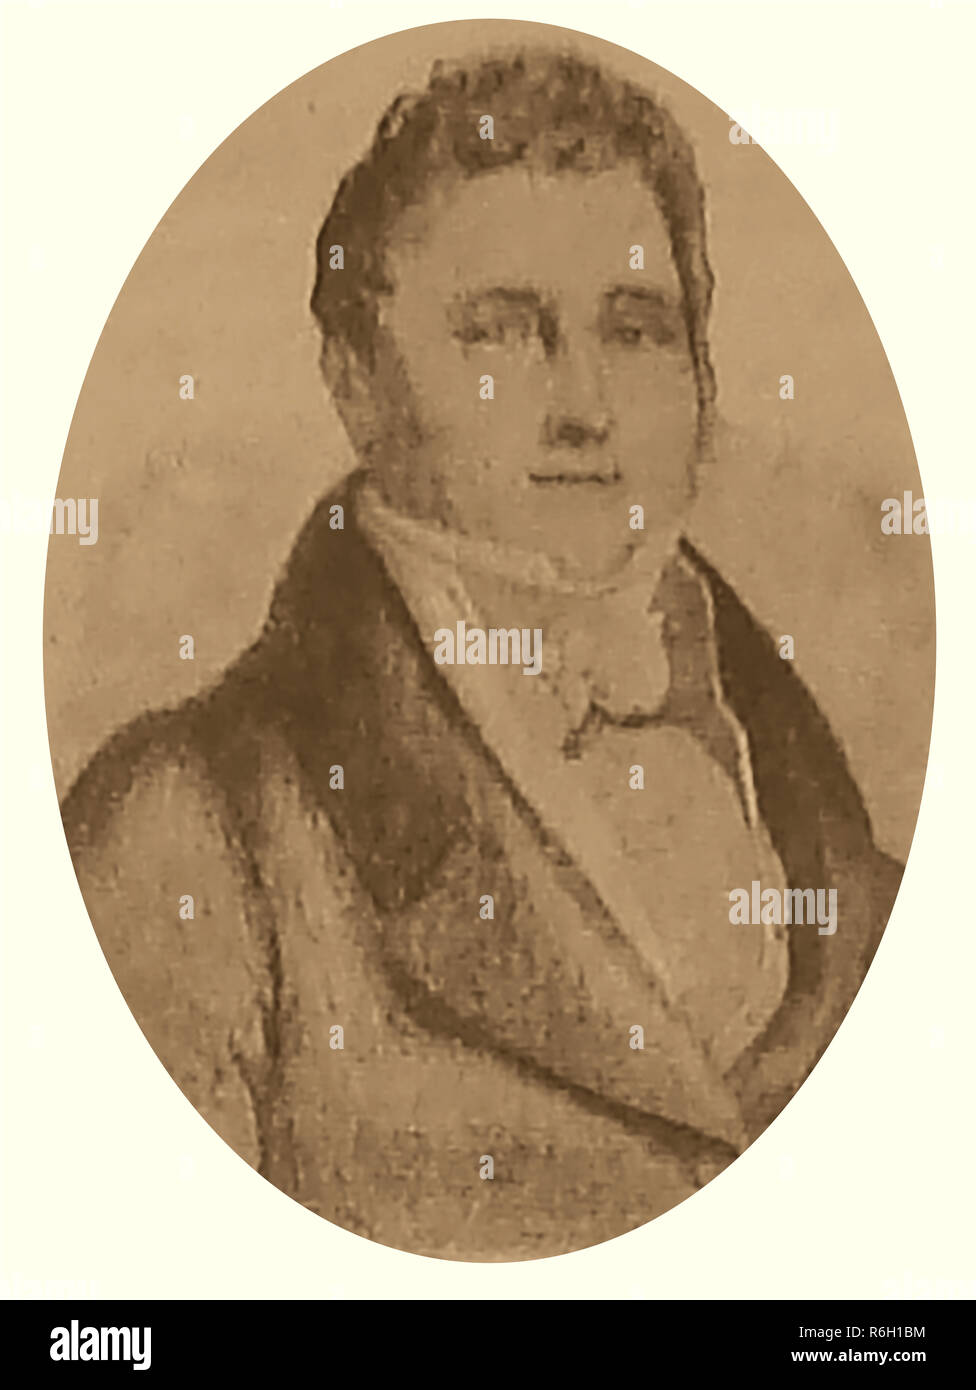 FRENCH REVOLUTIONARY FIGURES - July Revolution of 1830 - (2nd French Revolution)Portrait of financier Jacques Laffitte, Member of the Chamber of Deputies for Seine-Inférieure and 8th Prime Minister of France Stock Photo